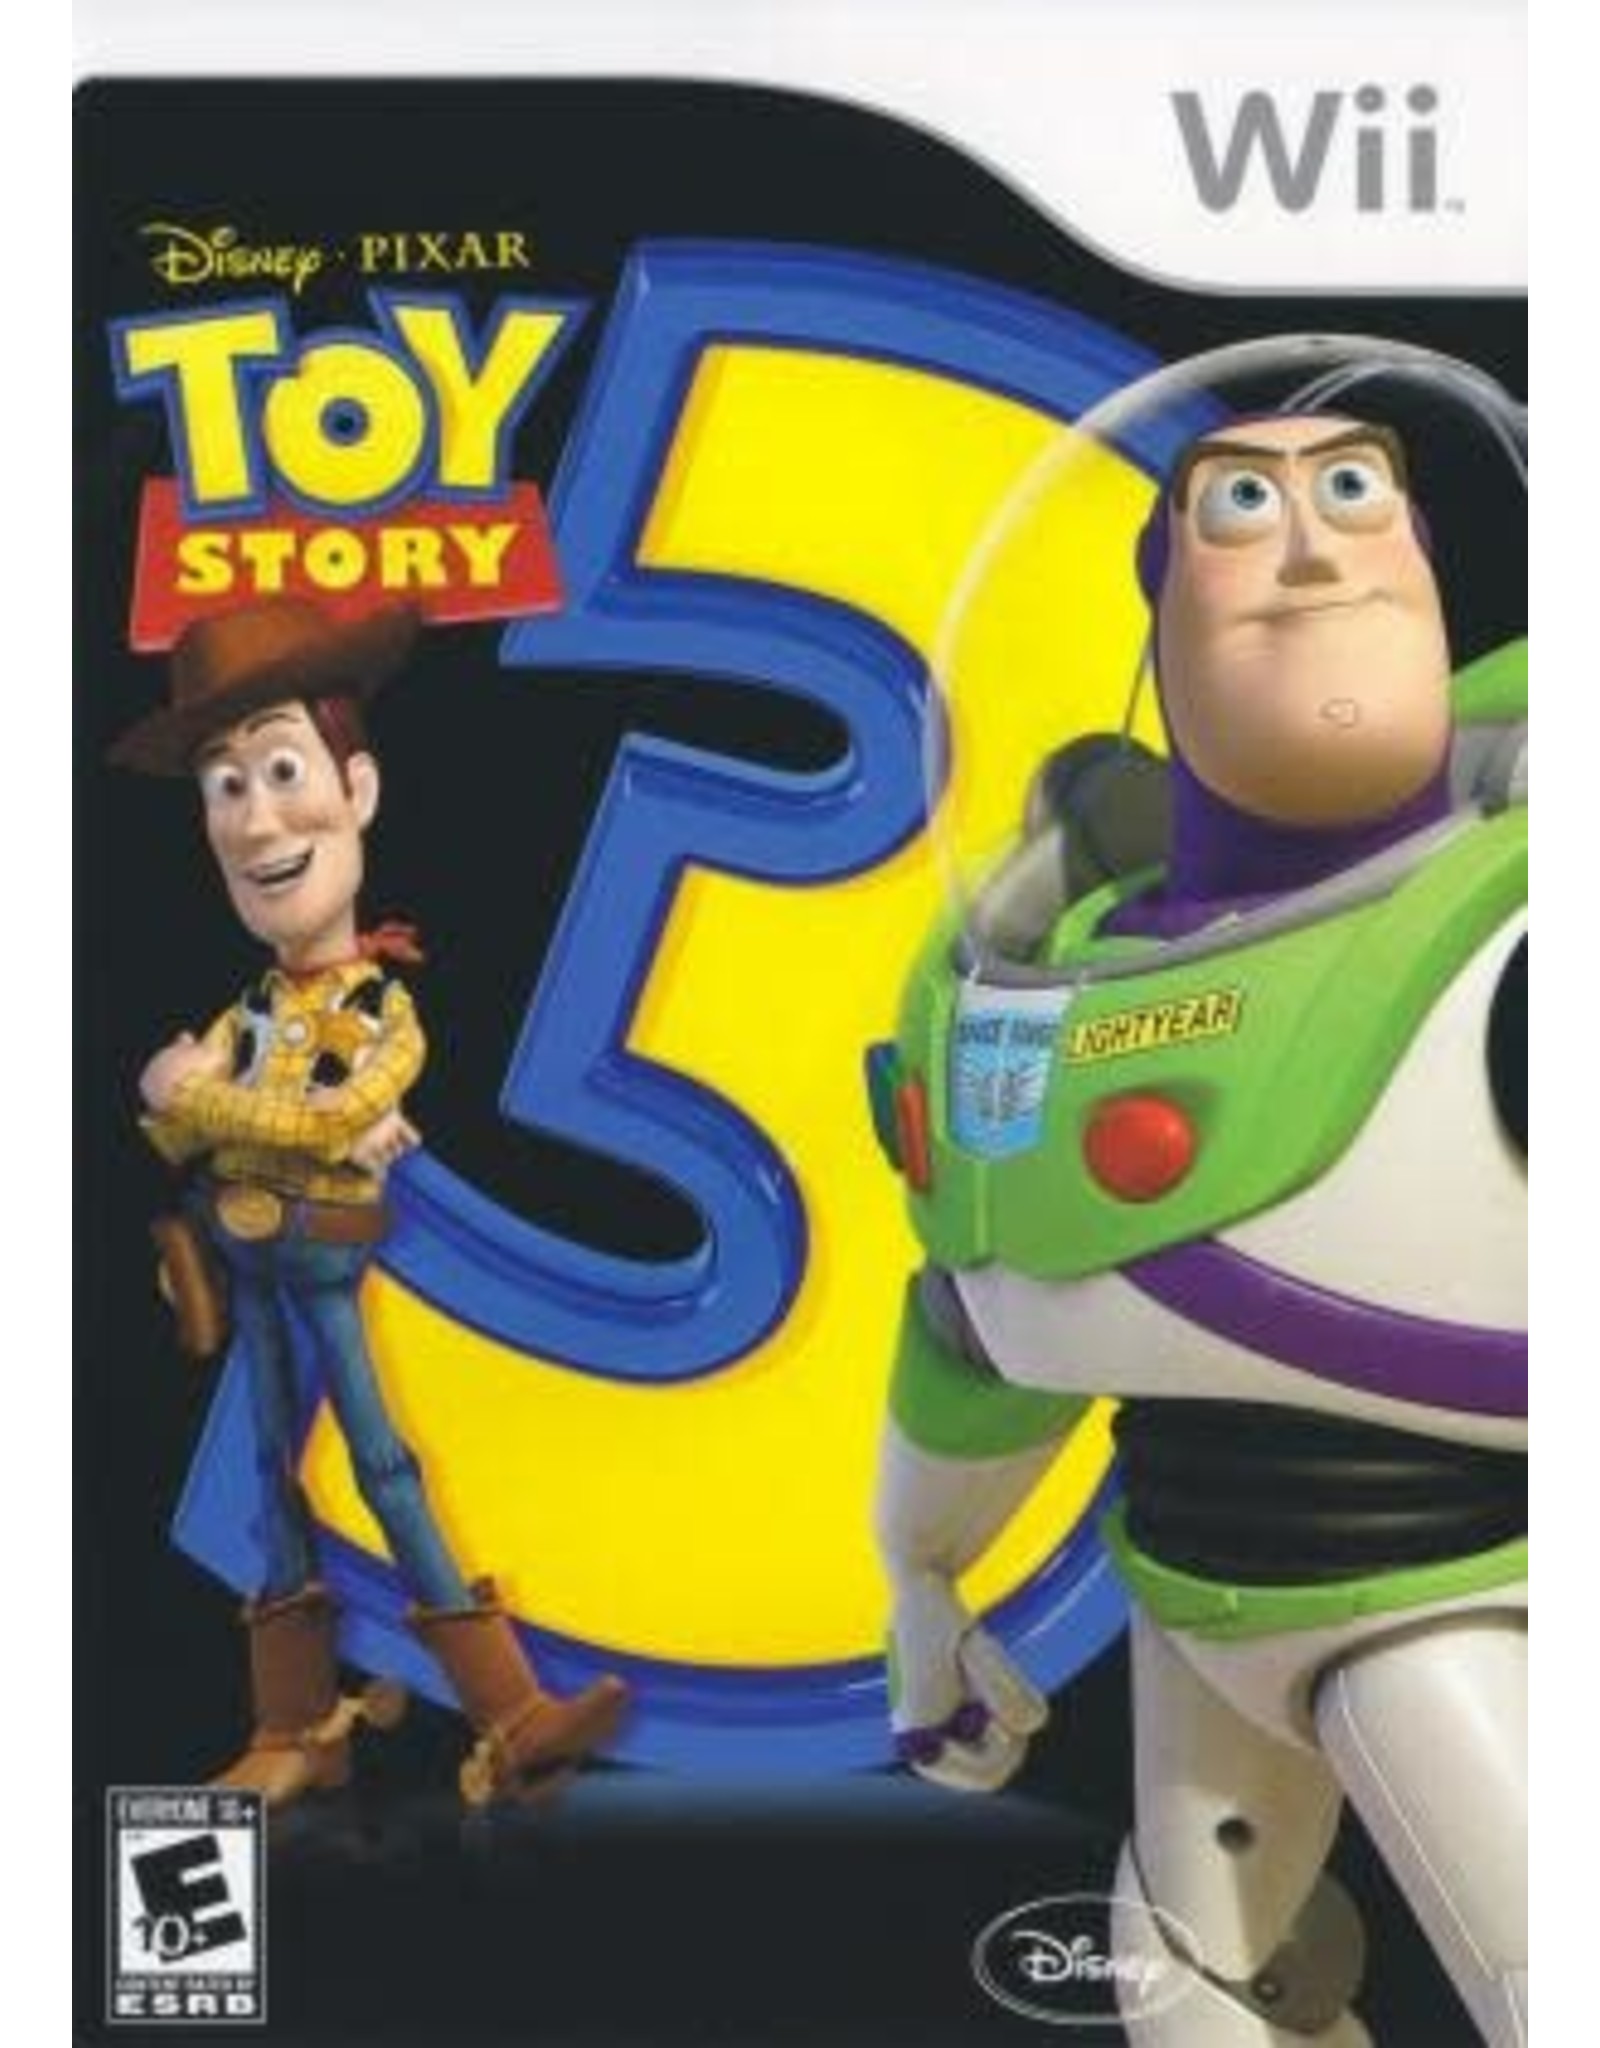 Wii Toy Story 3: The Video Game (CiB)